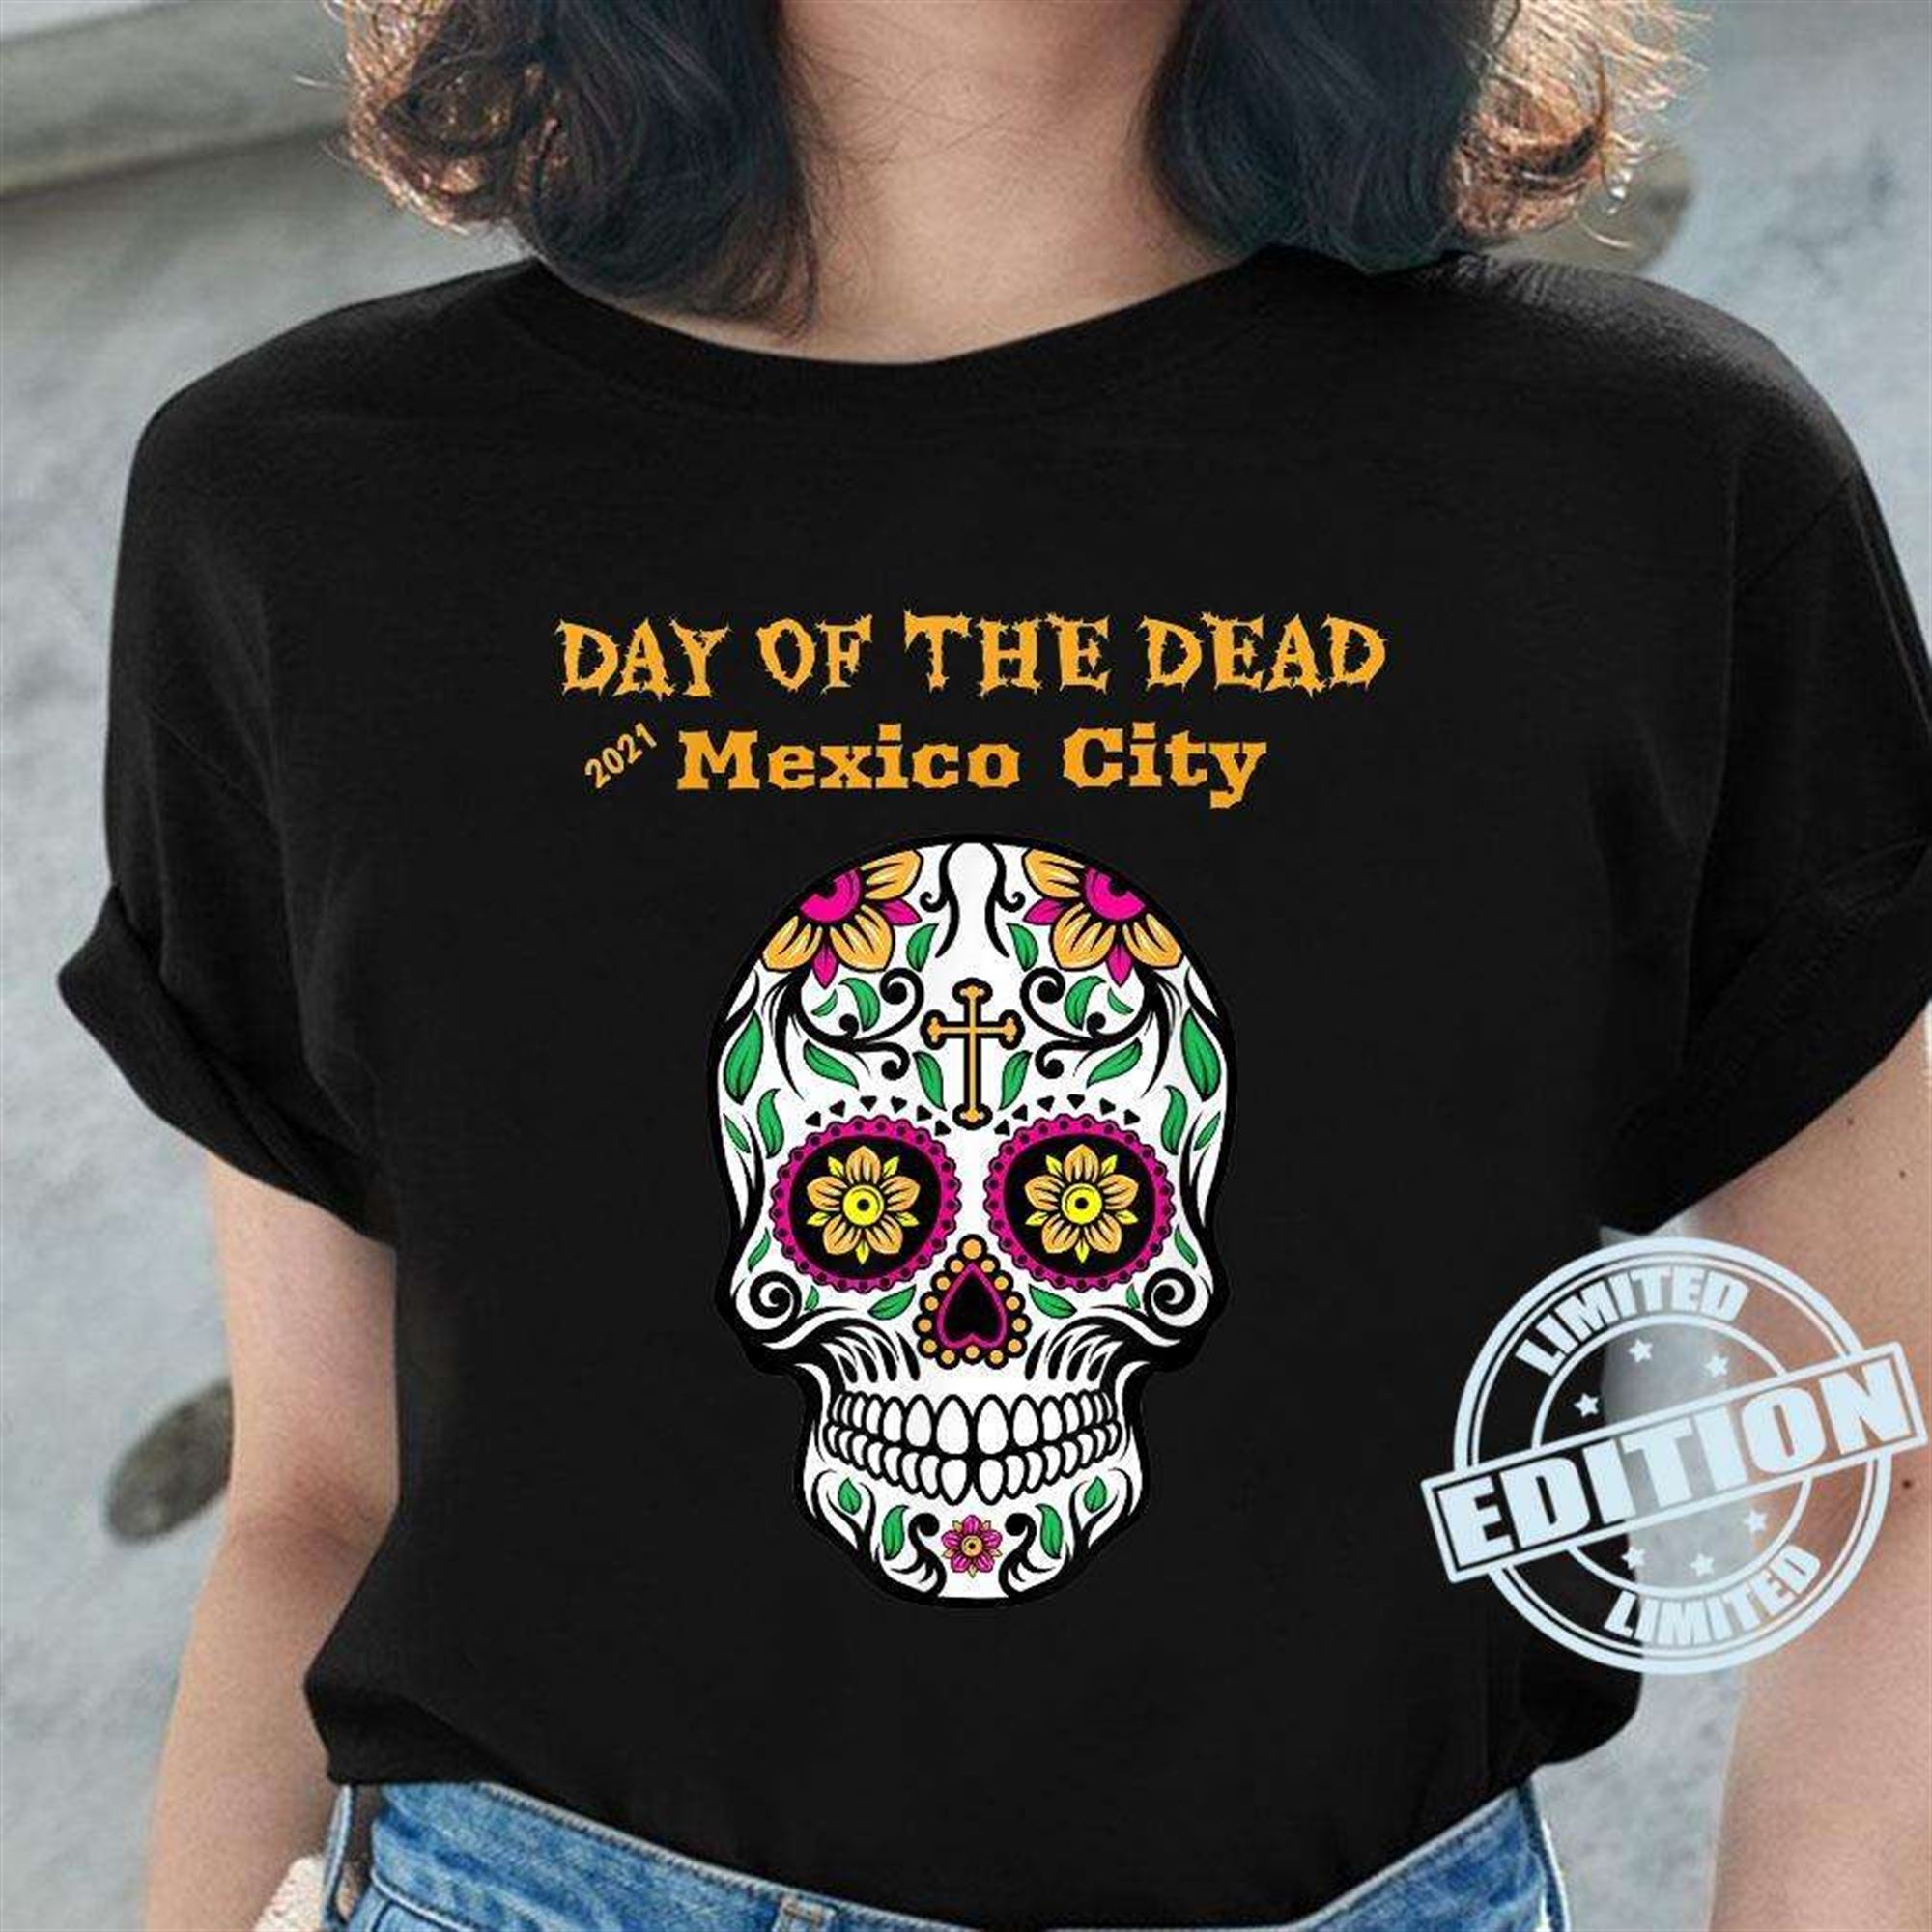 Day Of The Dead Skull Halloween T-shirt Full Size Up To 5xl